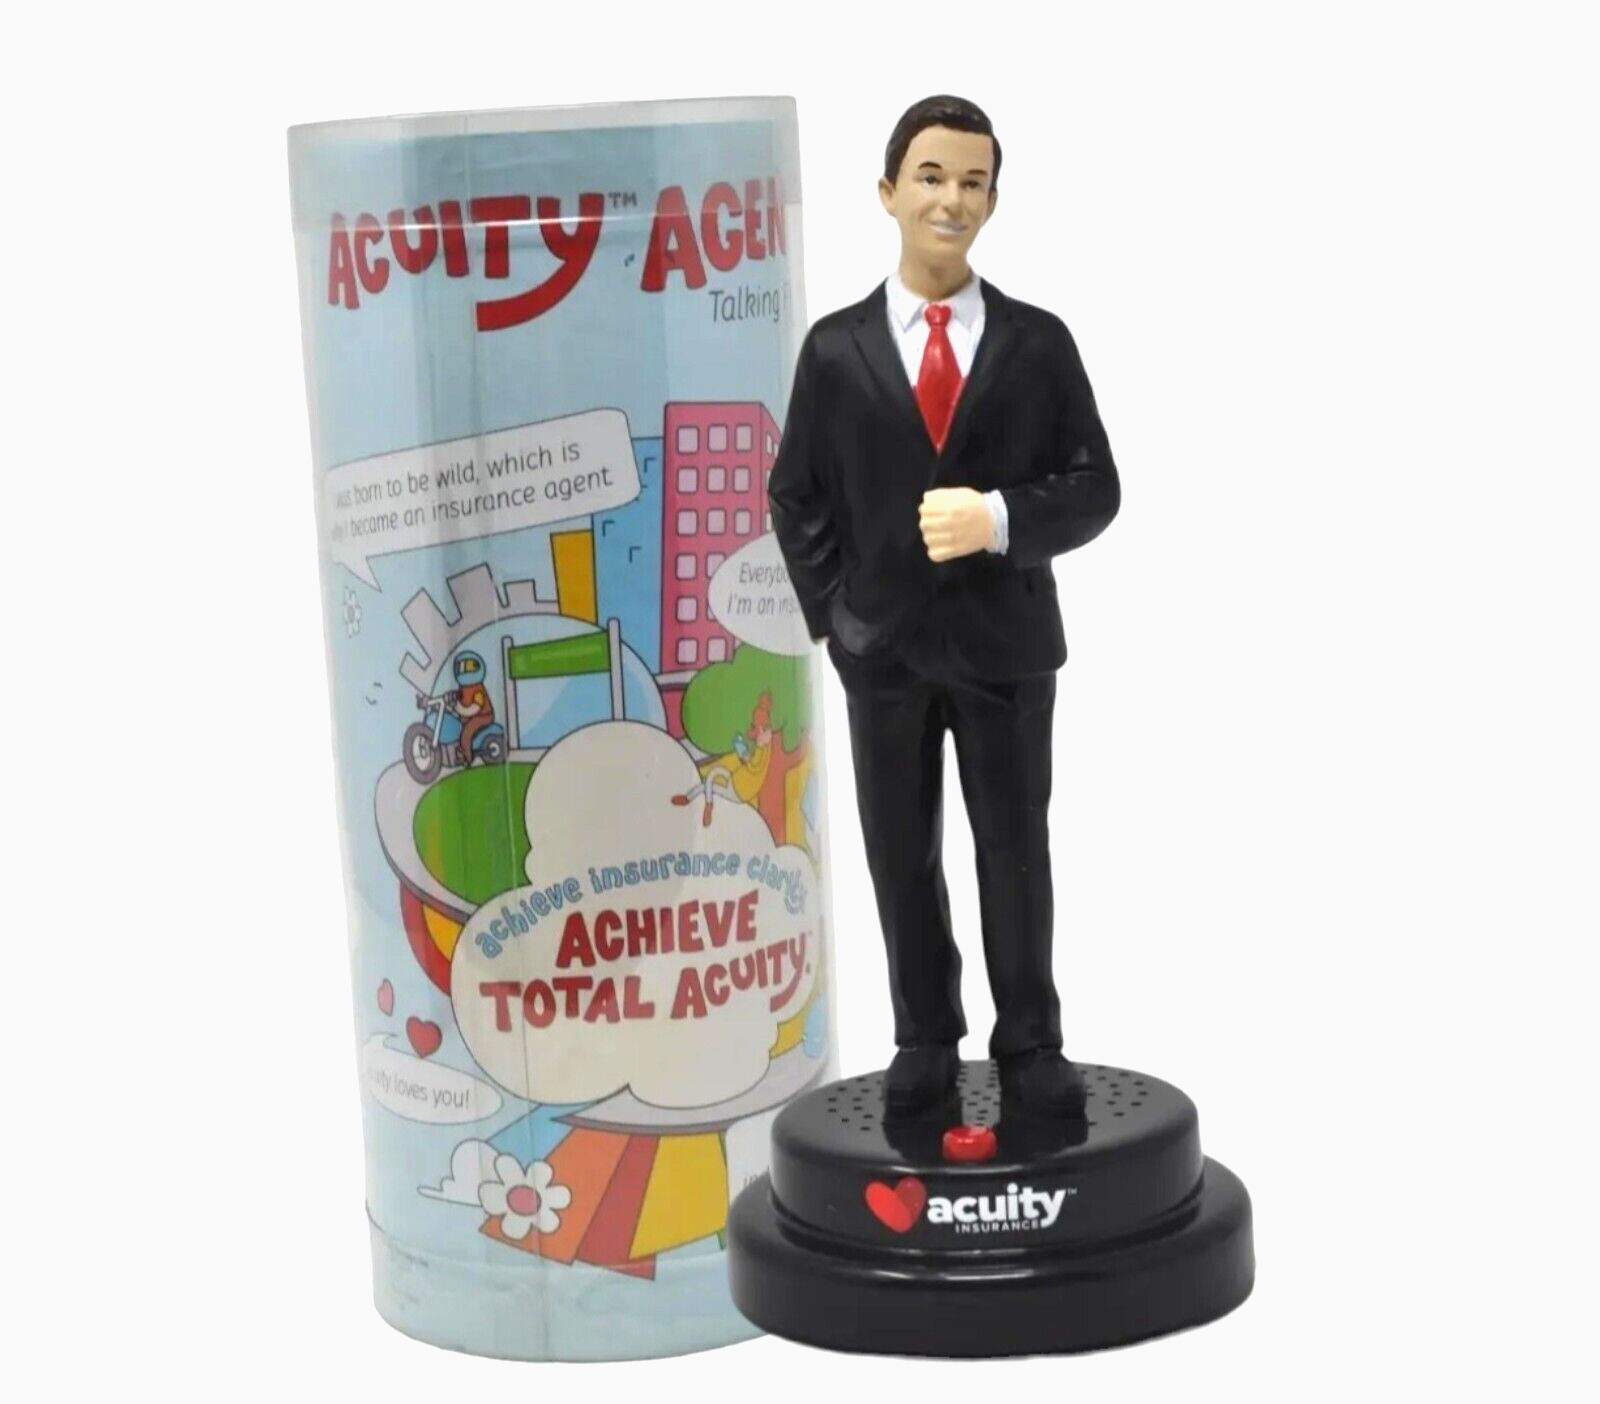 Acuity Insurance Talking Agent Figure With Box, In Preowned Condition As Found.